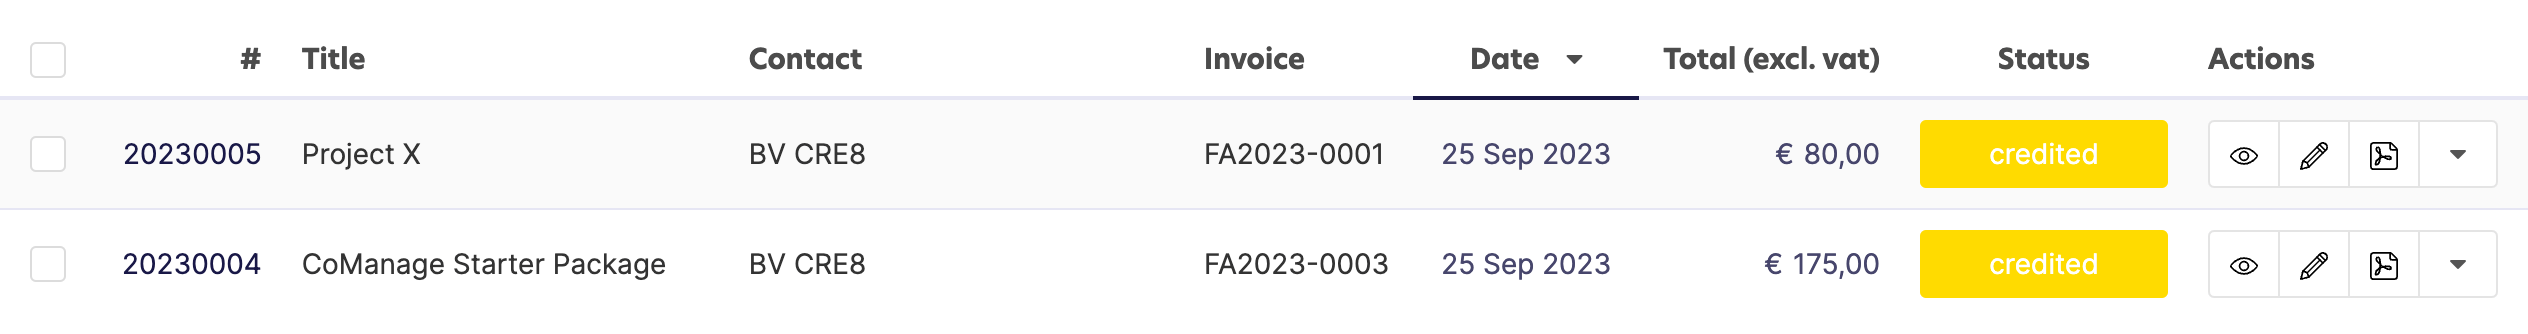 Credited-invoices-overview.png